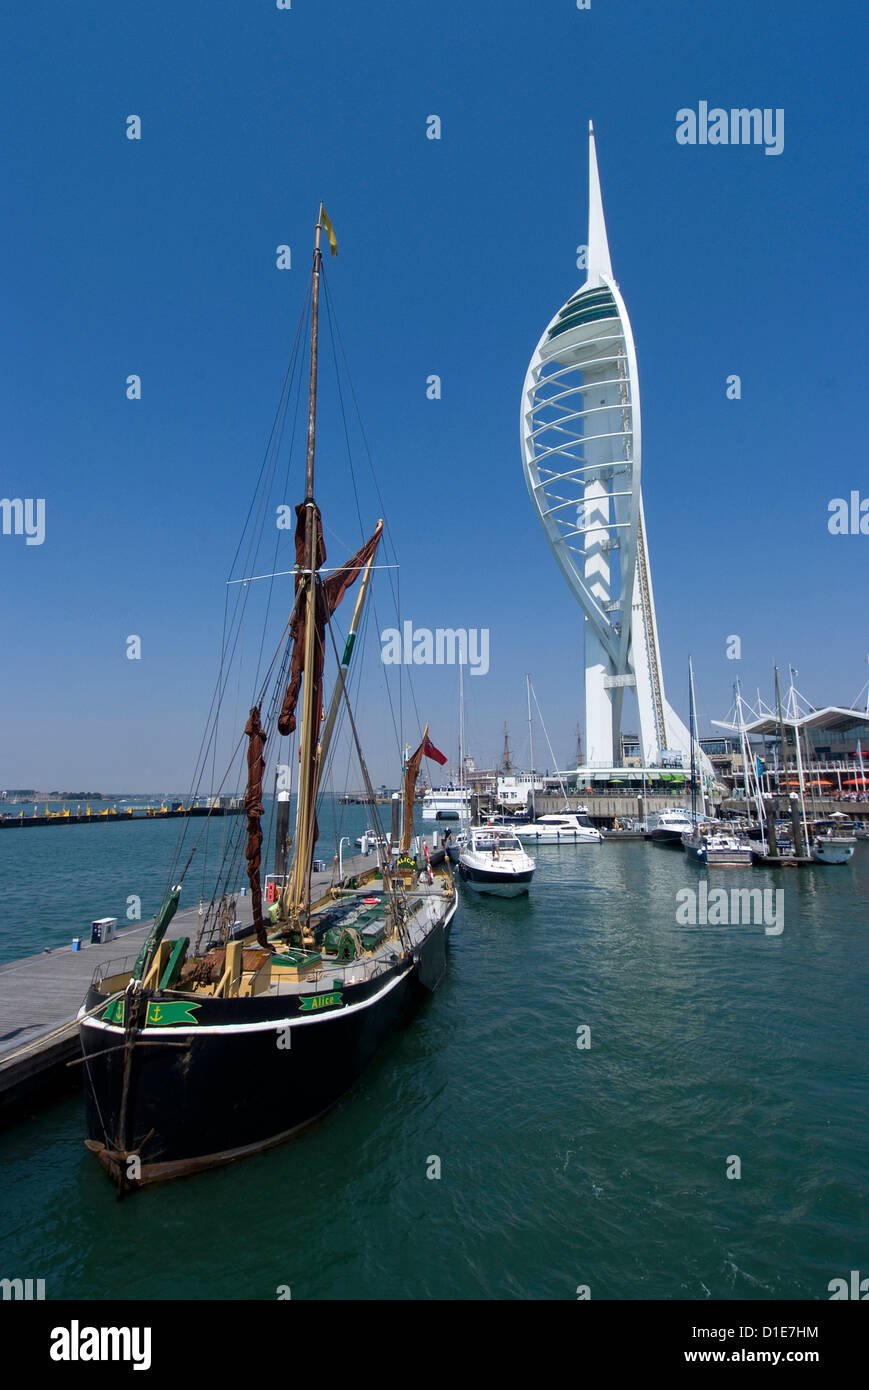 Spinnaker Tower, Portsmouth de Gunwharf, Hampshire, Angleterre, Royaume-Uni, Europe Banque D'Images